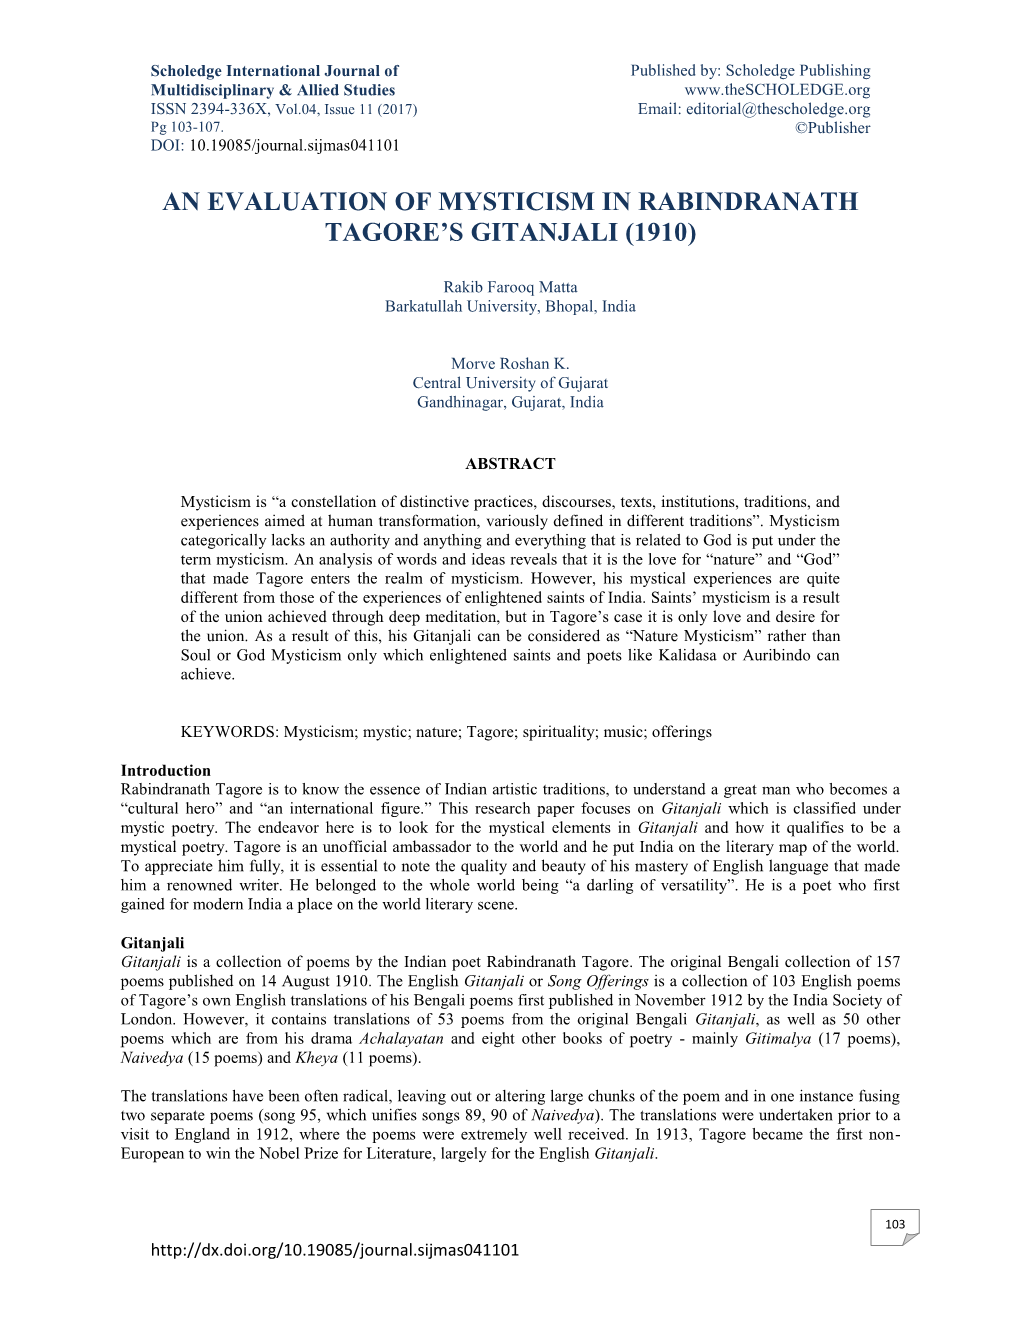 An Evaluation of Mysticism in Rabindranath Tagore's